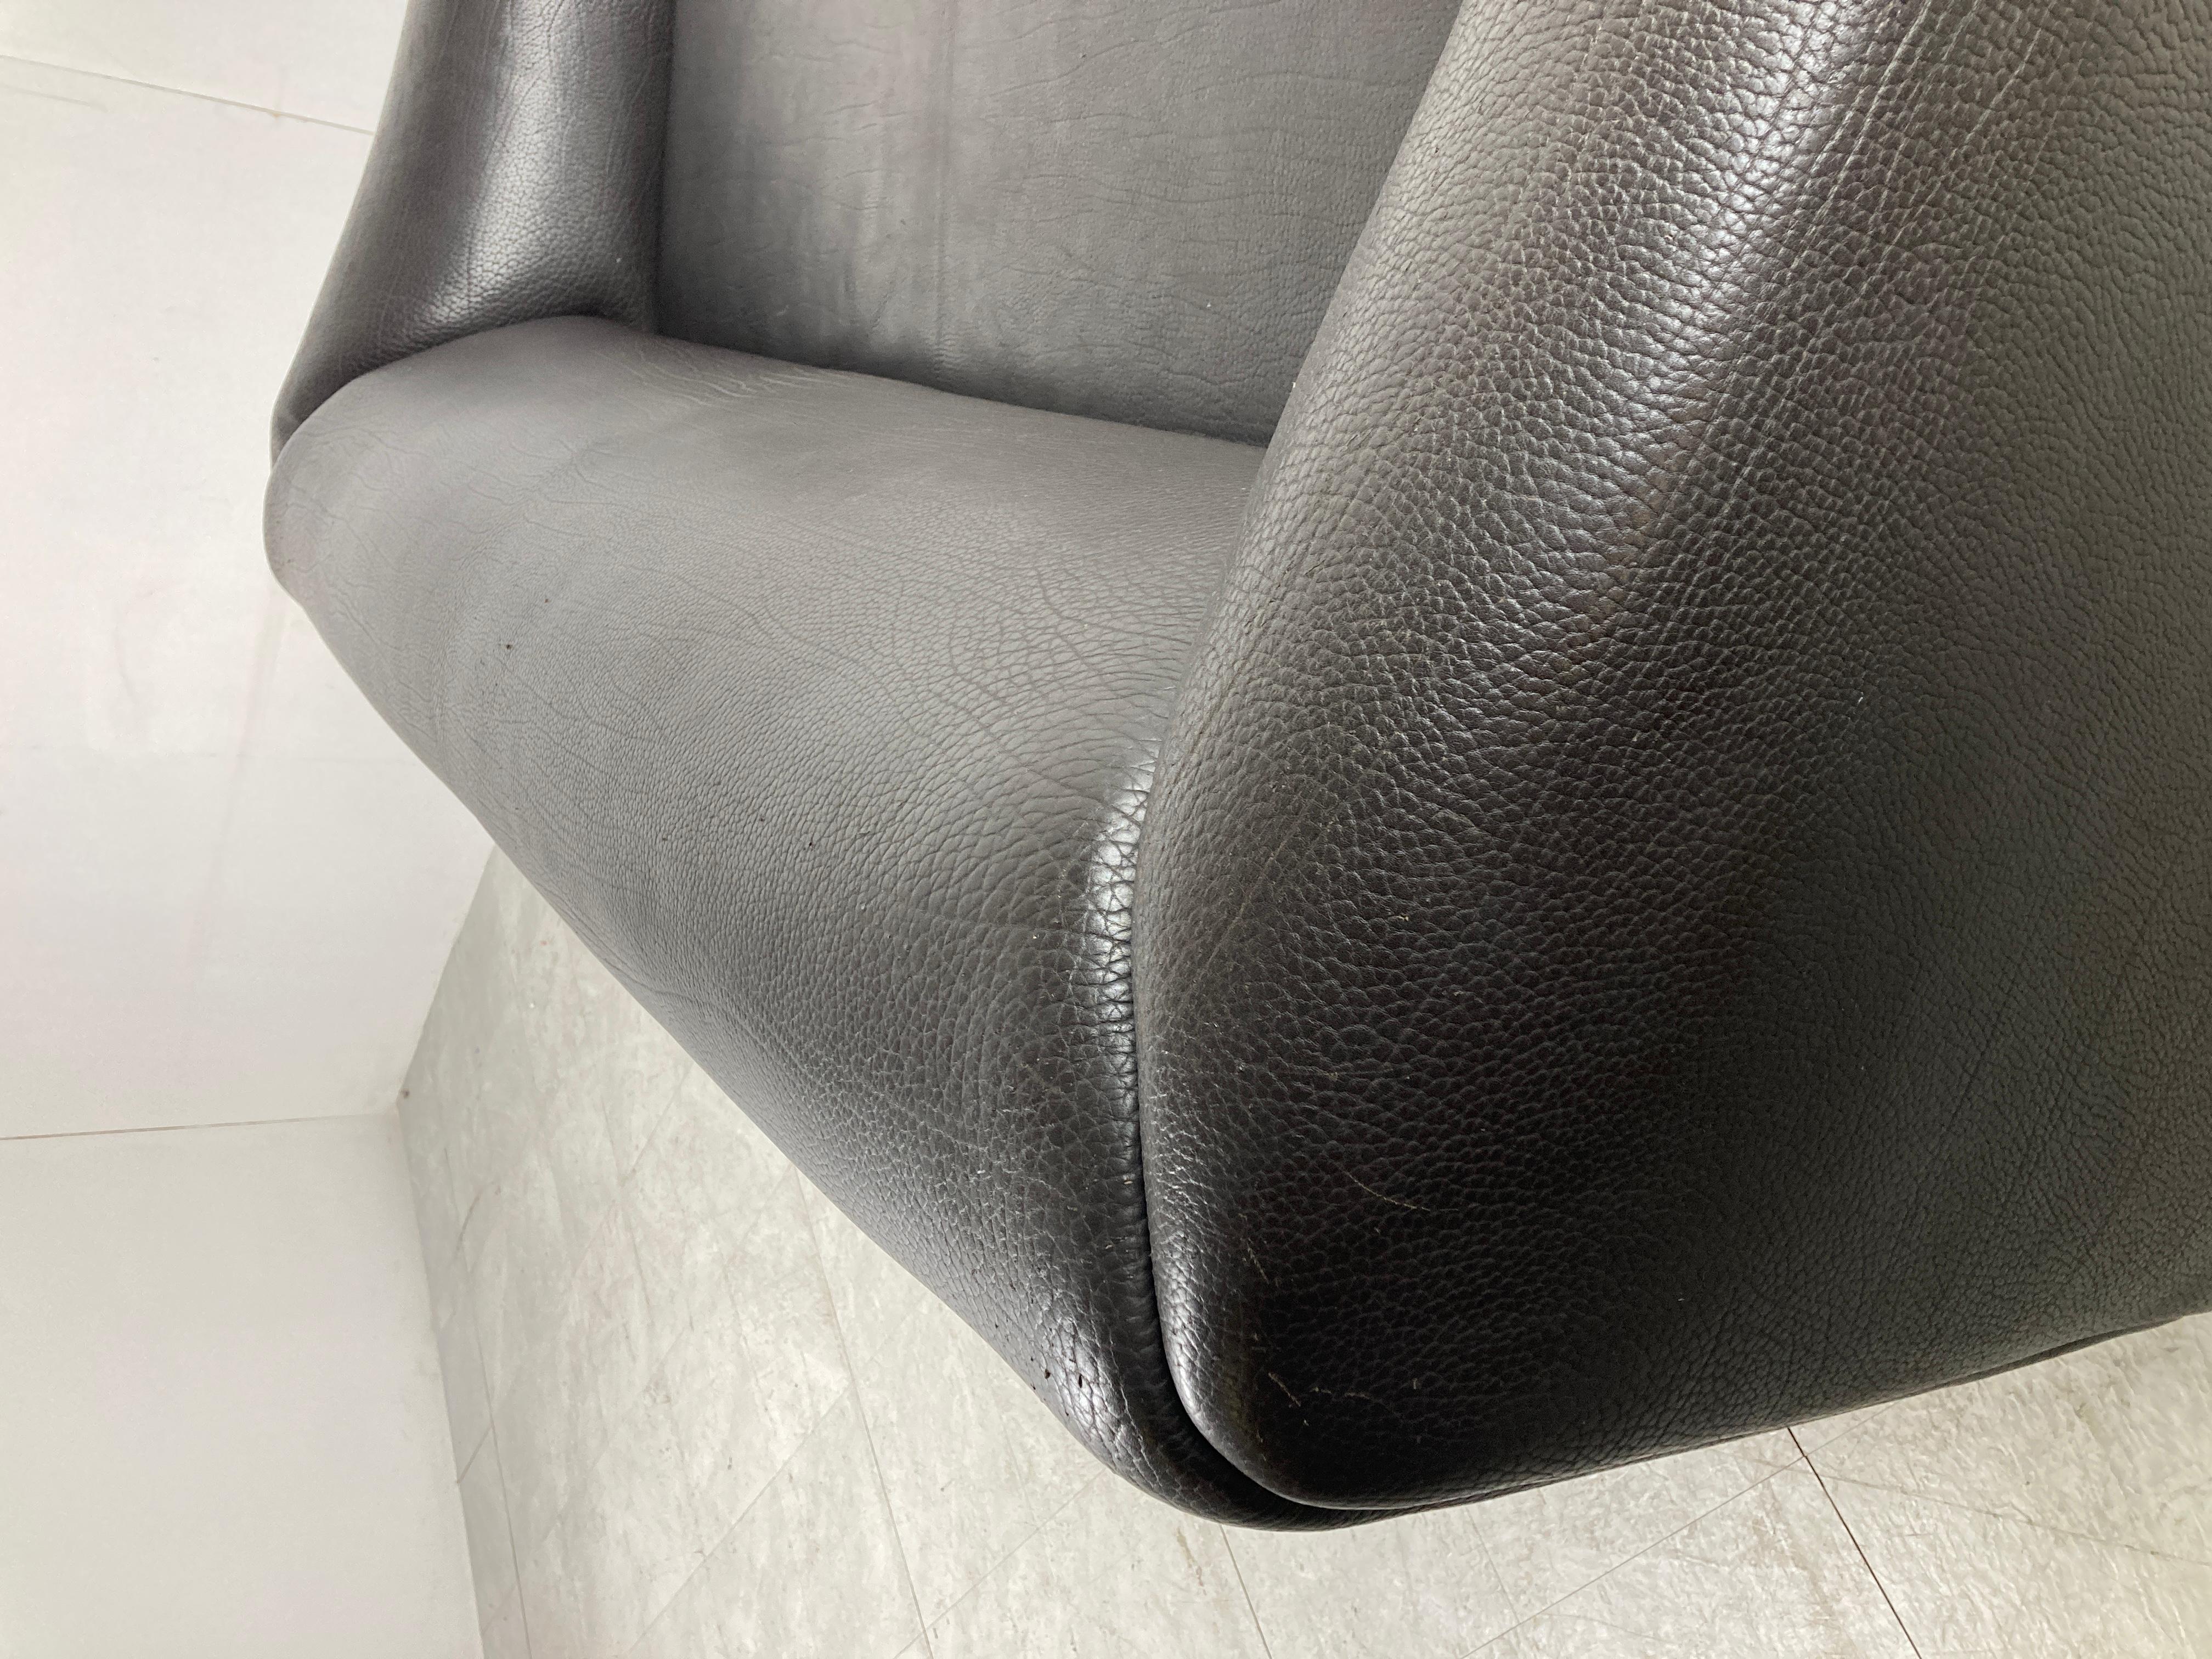 Gorgeous black leather DS47 sofa from De Sede.

De Sede, renowned for using the best quality leather has created some wonderful sofas.

This one is no exception and has very thick neck leather upholstery.

Combined with the curvy design from the